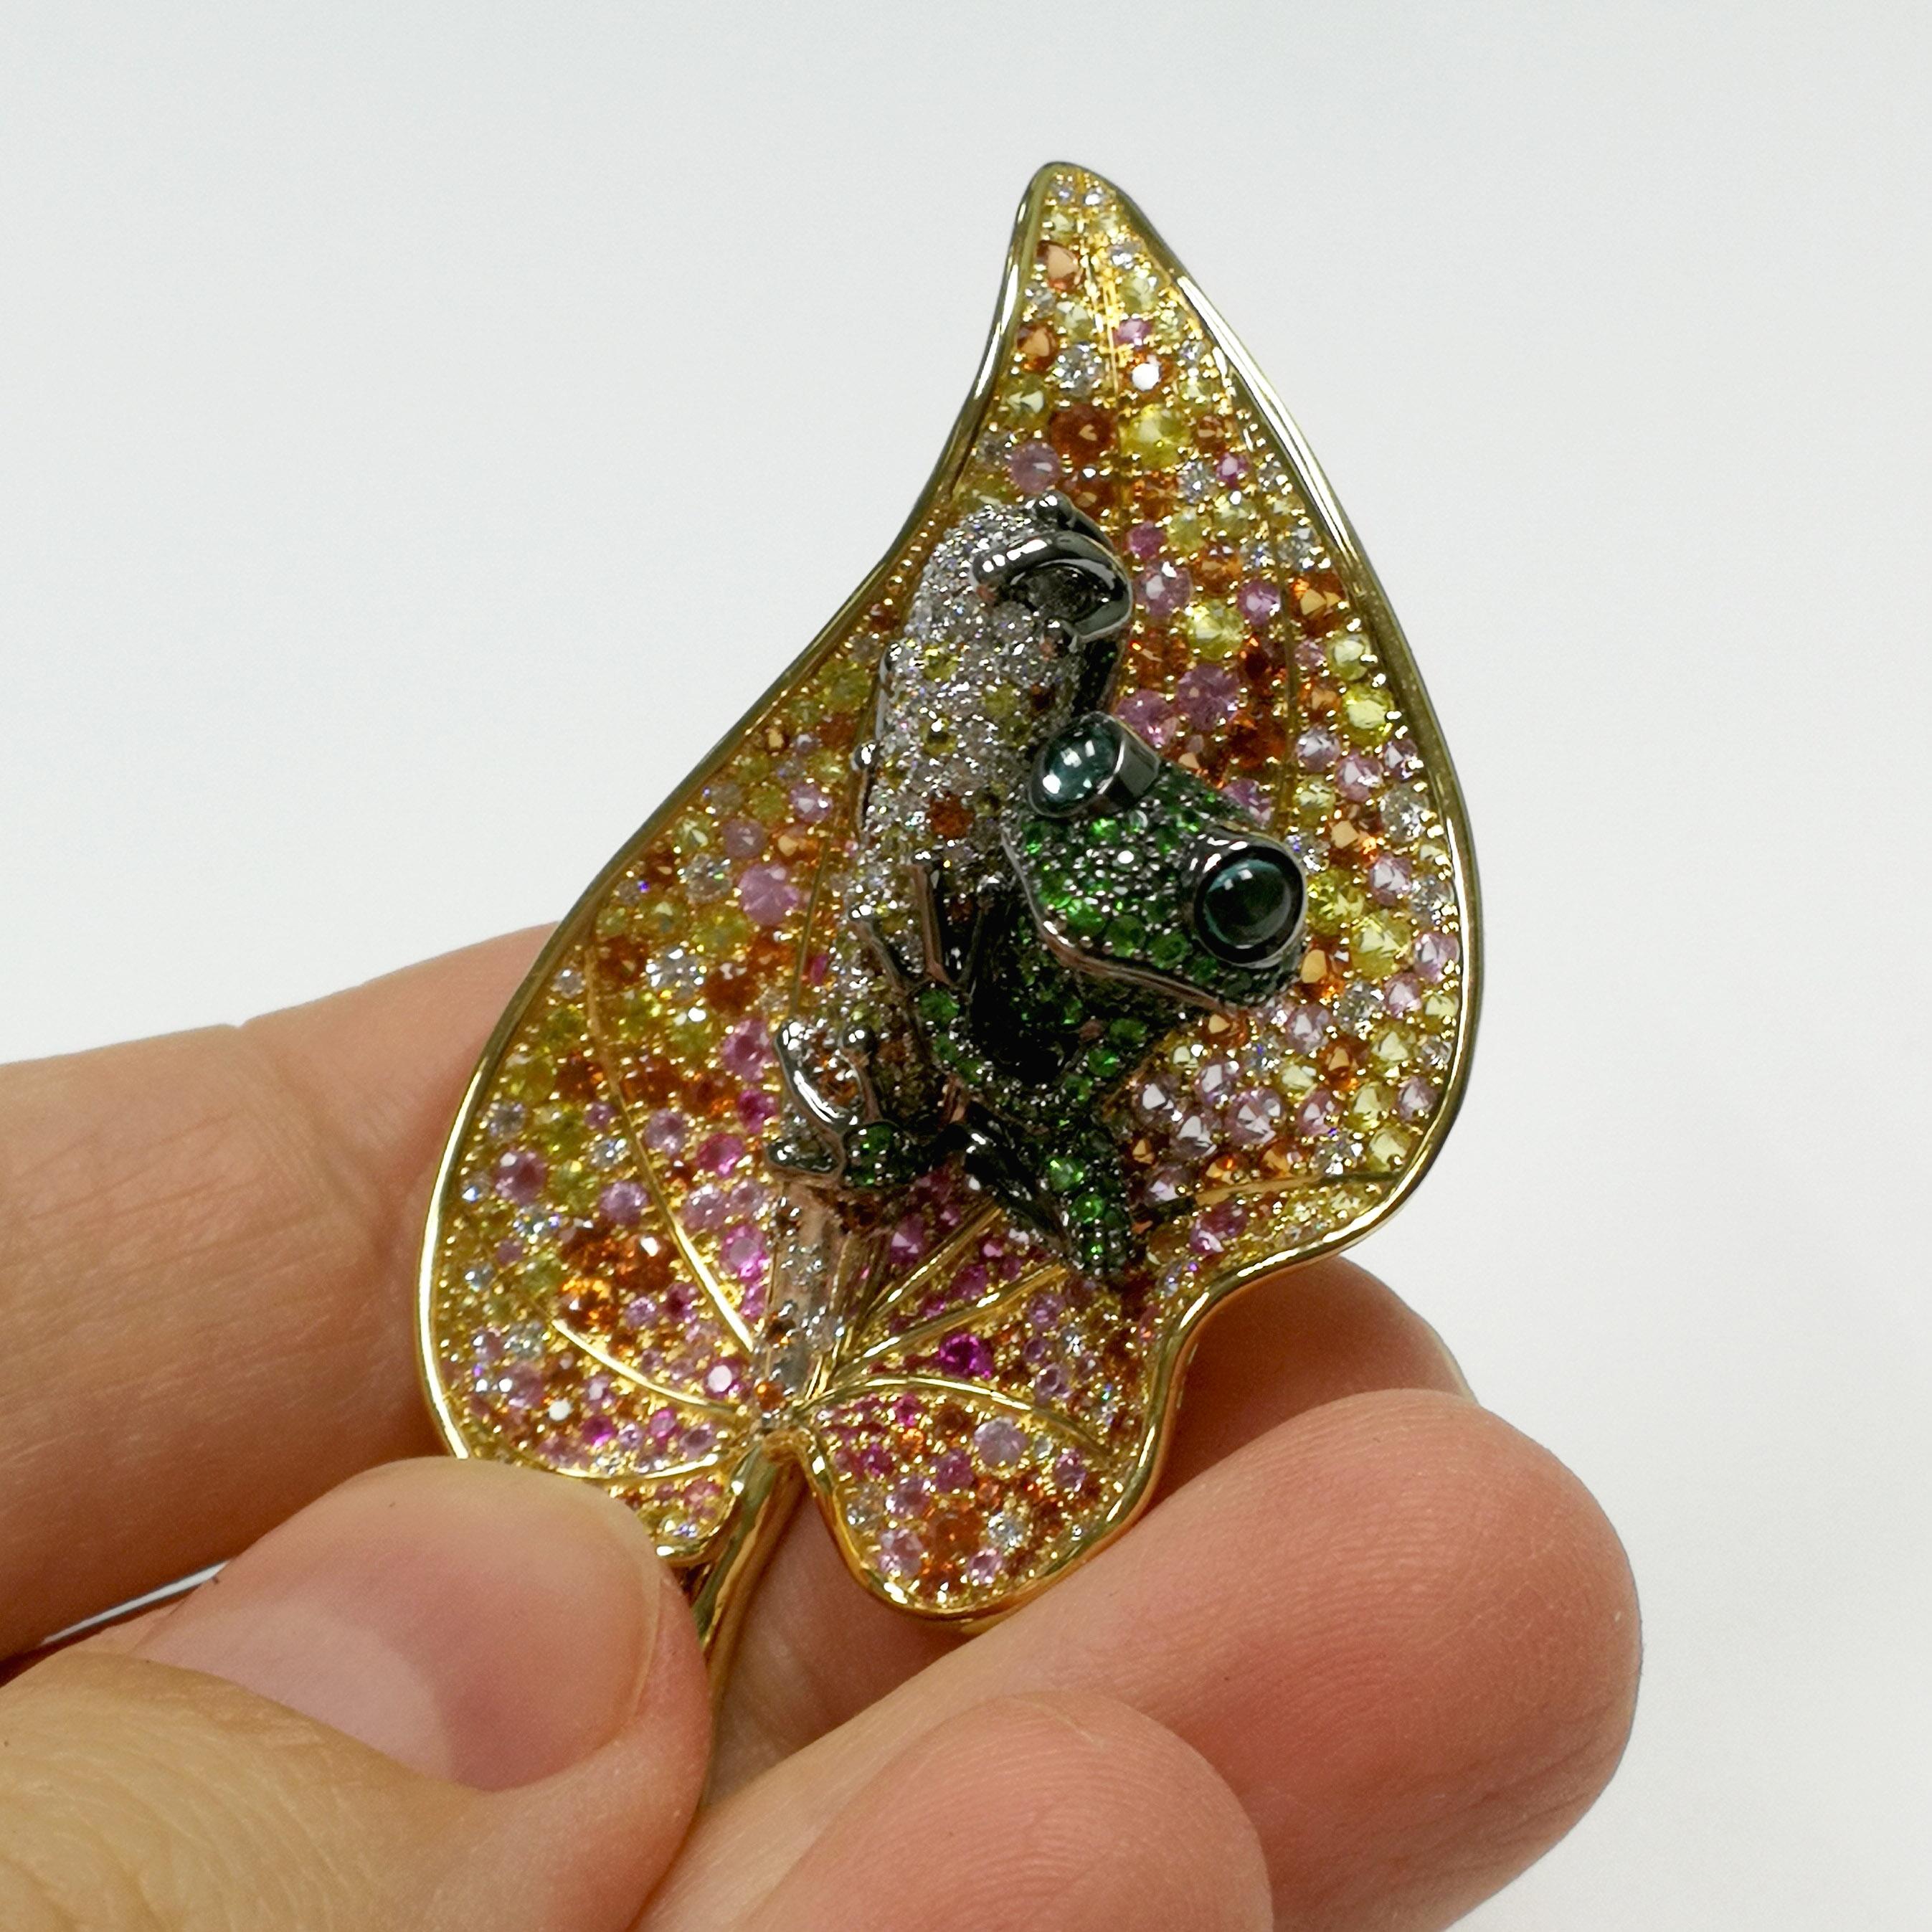 18 Karat Yellow White and Black Gold Frog on the Leaf Brooch. The frog body is all about tsavorites, Leaf are with Diamonds, Pink and Yellow Sapphires

54mm x 32mm x 17mm
18.92 gms